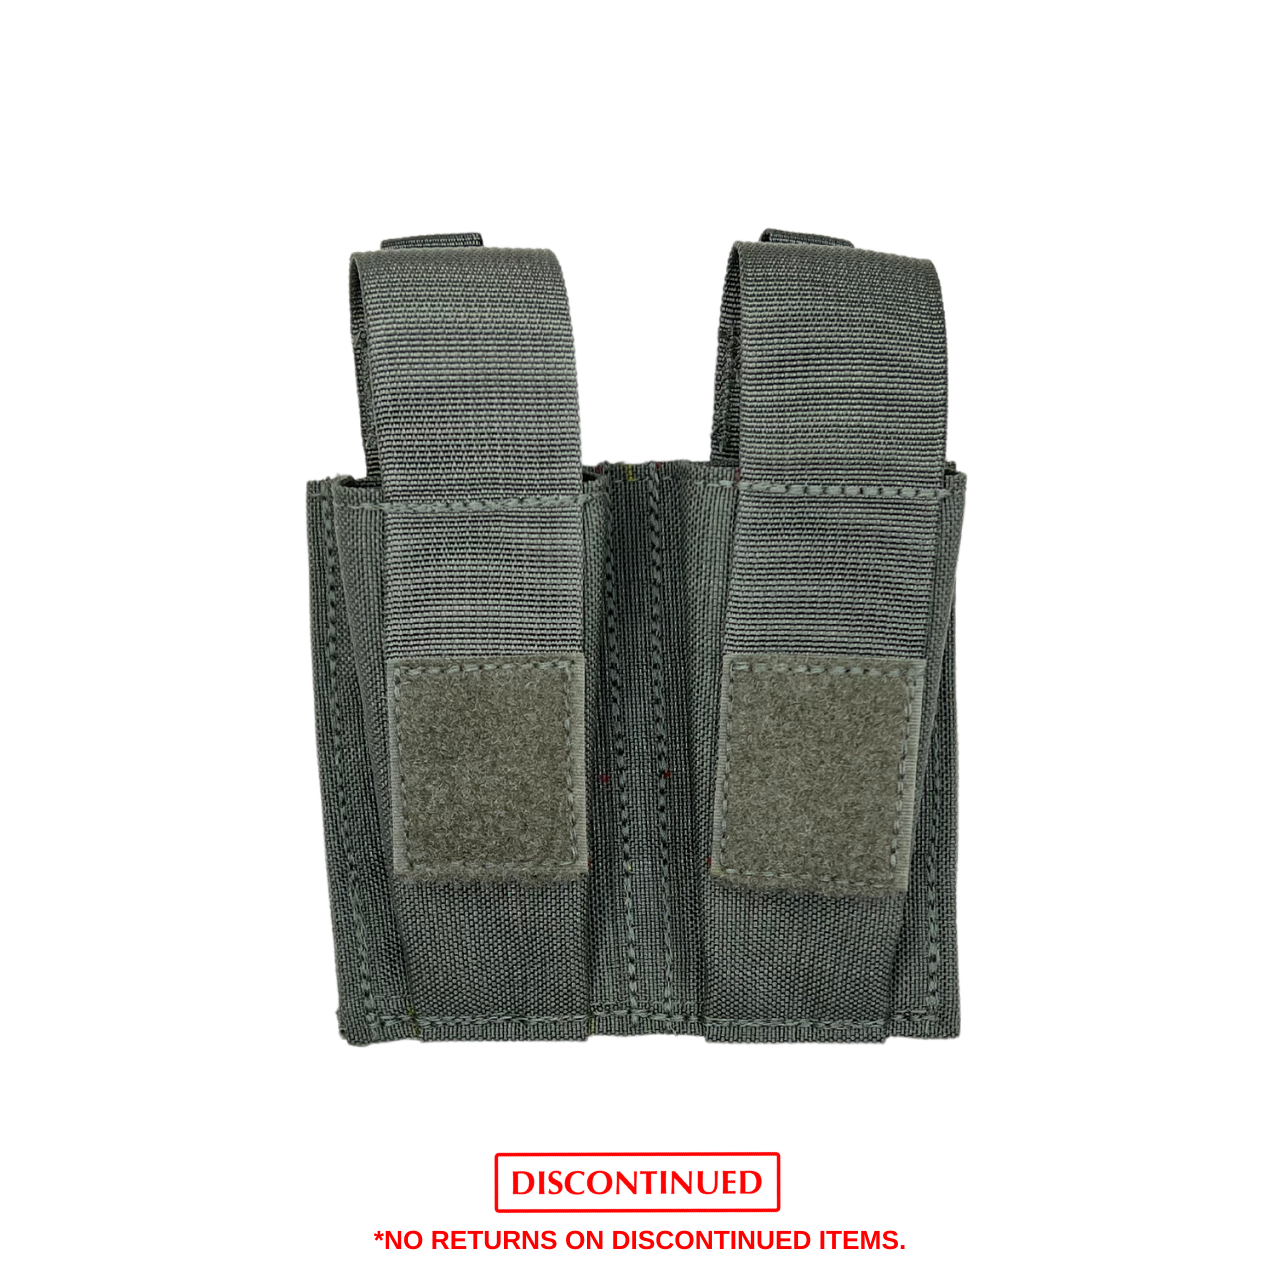 50441 M9 FOUR MAG POUCH